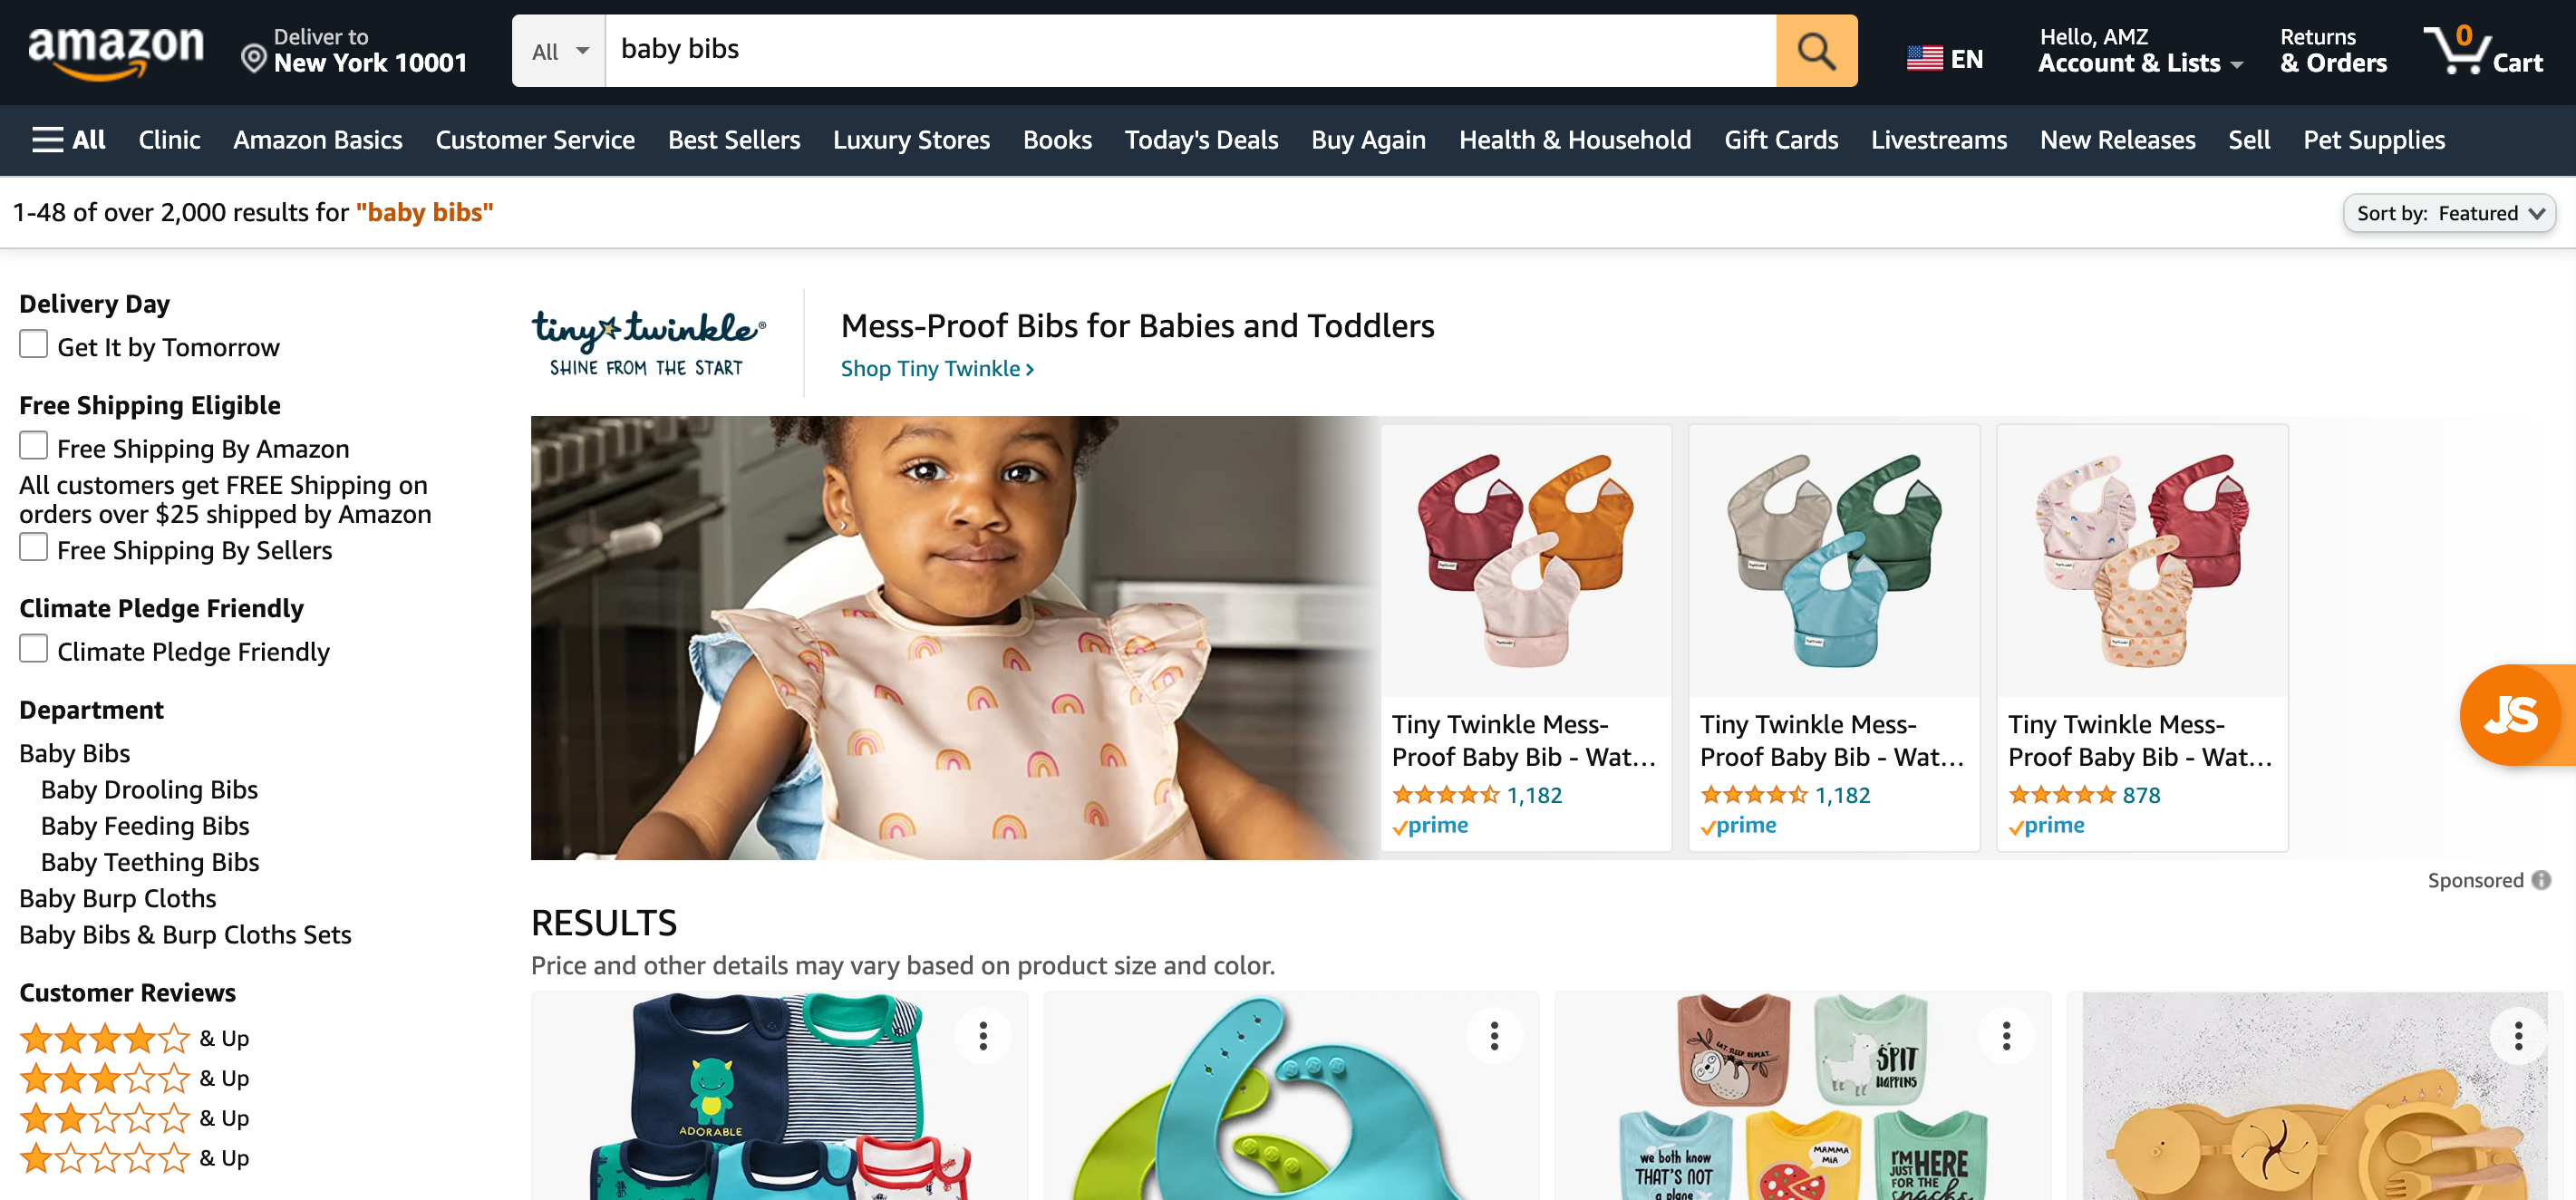 Product detail page optimization for Amazon